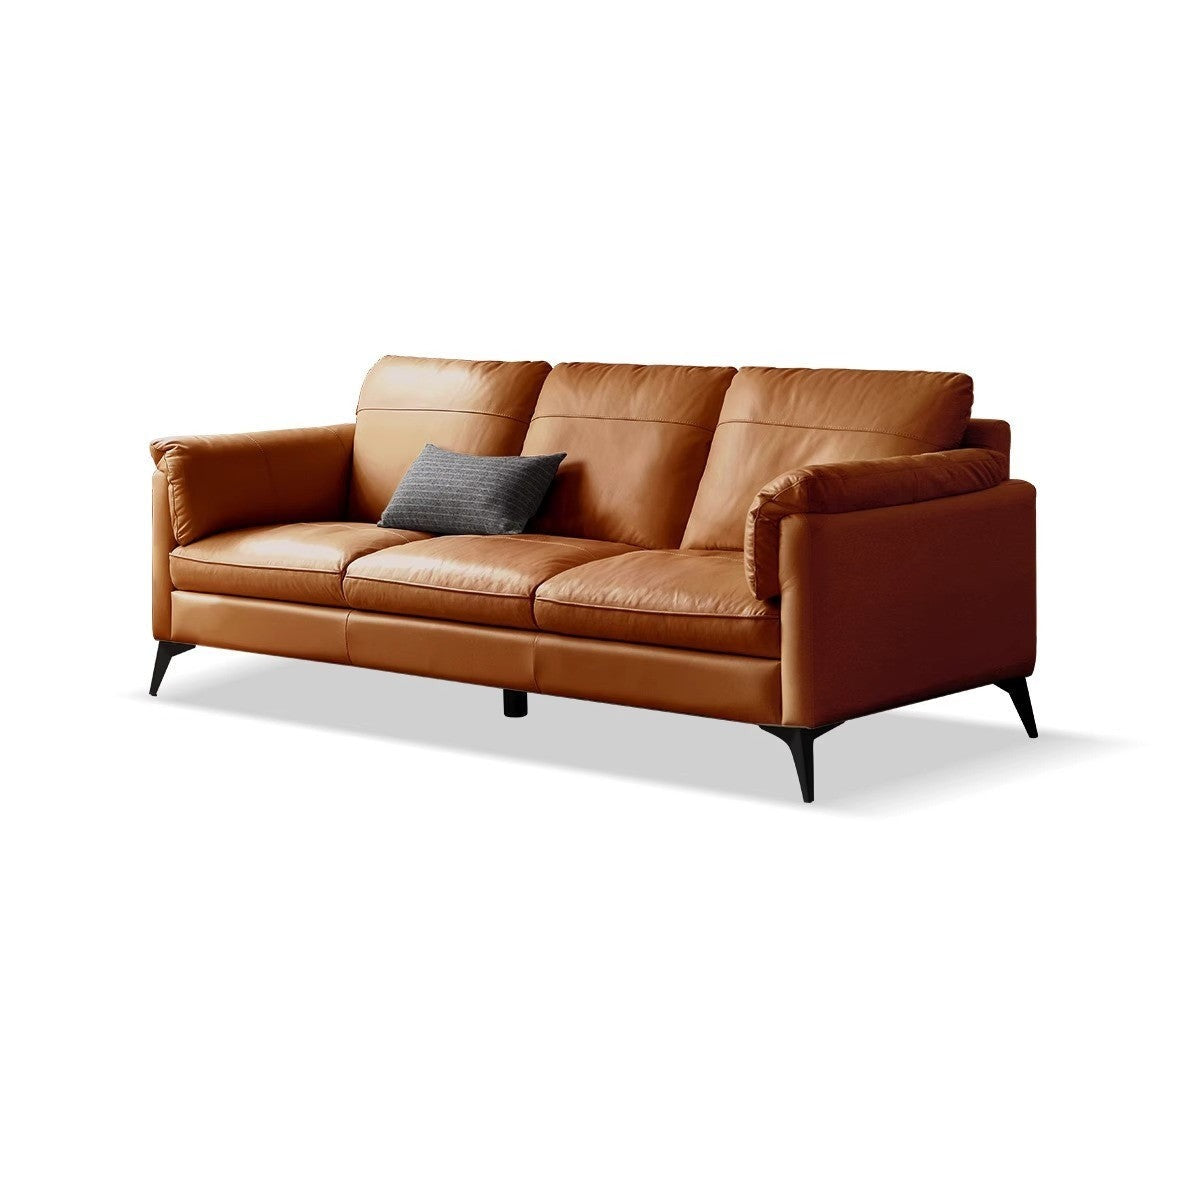 Italian leather sofa first layer cowhide light luxury)